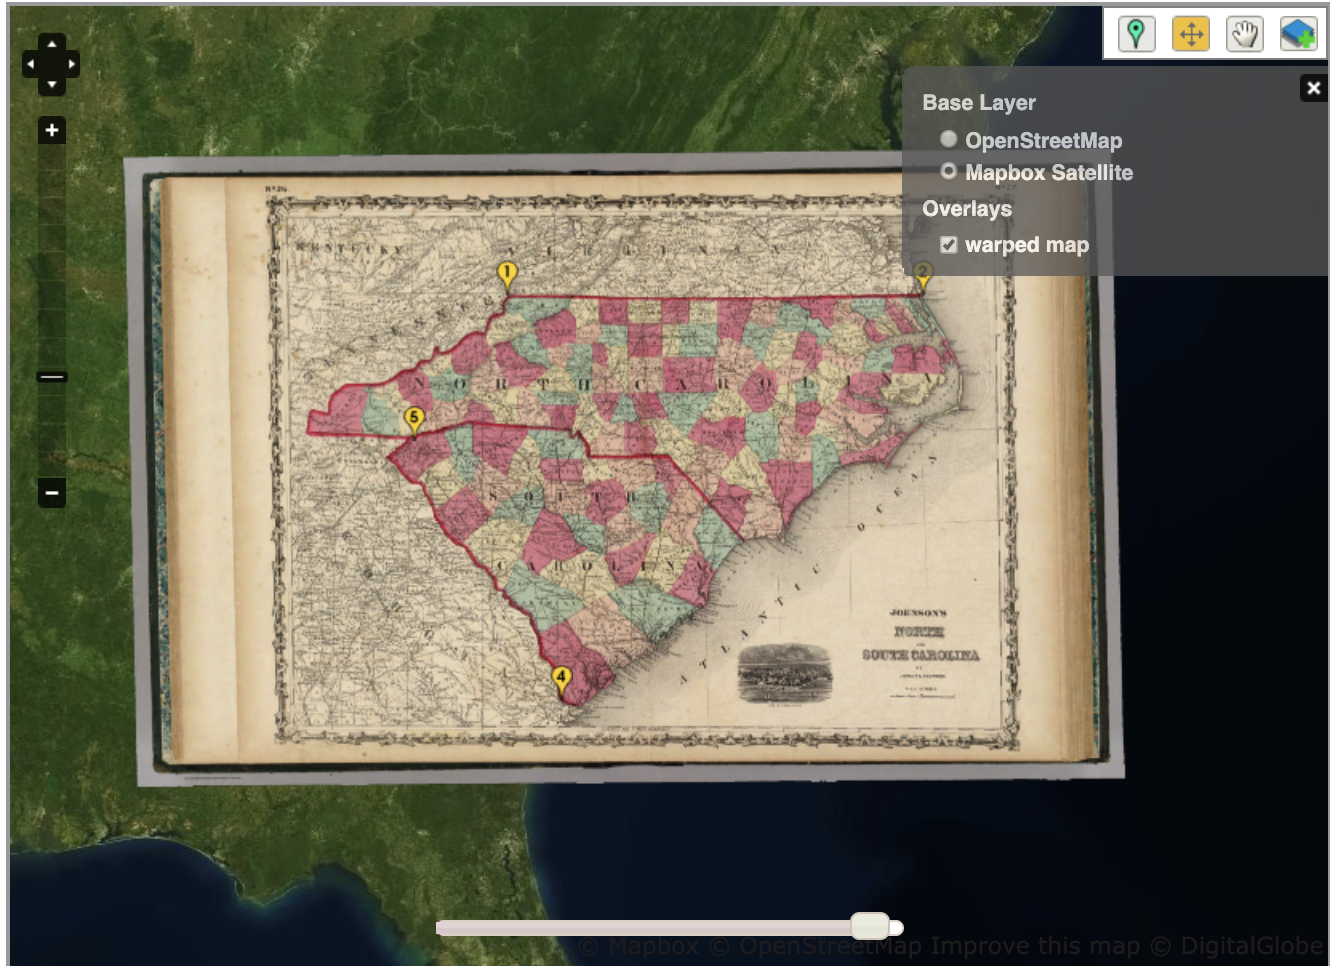 Screenshot of Map Warper's interface, with the scanned historical map of North Carolina and South Carolina overlaid onto a contemporary 'base layer' map of the same geographical region, at the same scale. At the upper left, there is a four-way navigation tool, and a slider-style zoom tool. At the upper right, there are icons including a marker point, a hand, and a four-way navigation arrow. A semi-opaque, information panel at upper right indicates that the base layer originates from Mapbox Satellite and the overlay is a warped map.